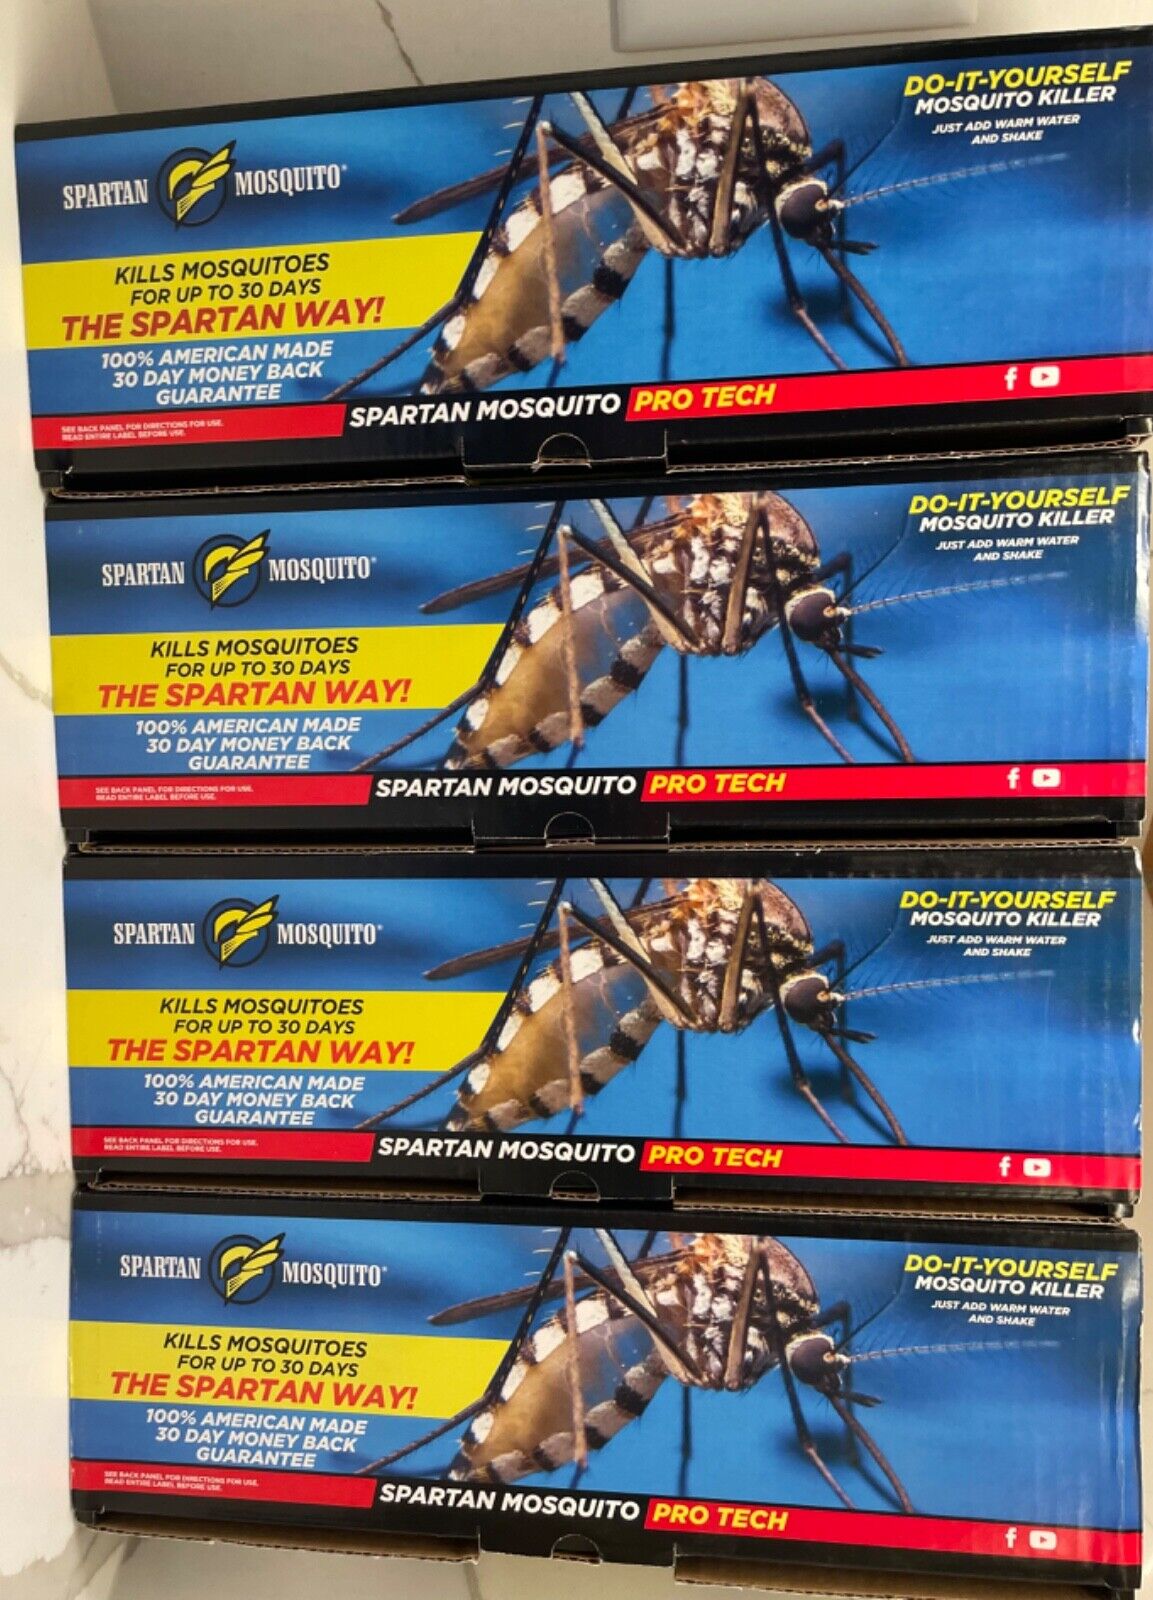 EIGHT 8 Spartan Mosquito Pro Tech Insect Repellent Device Tubes 4 BOXES Trap NEW Spartan Mosquito Spartan Mosquito Pro Tech